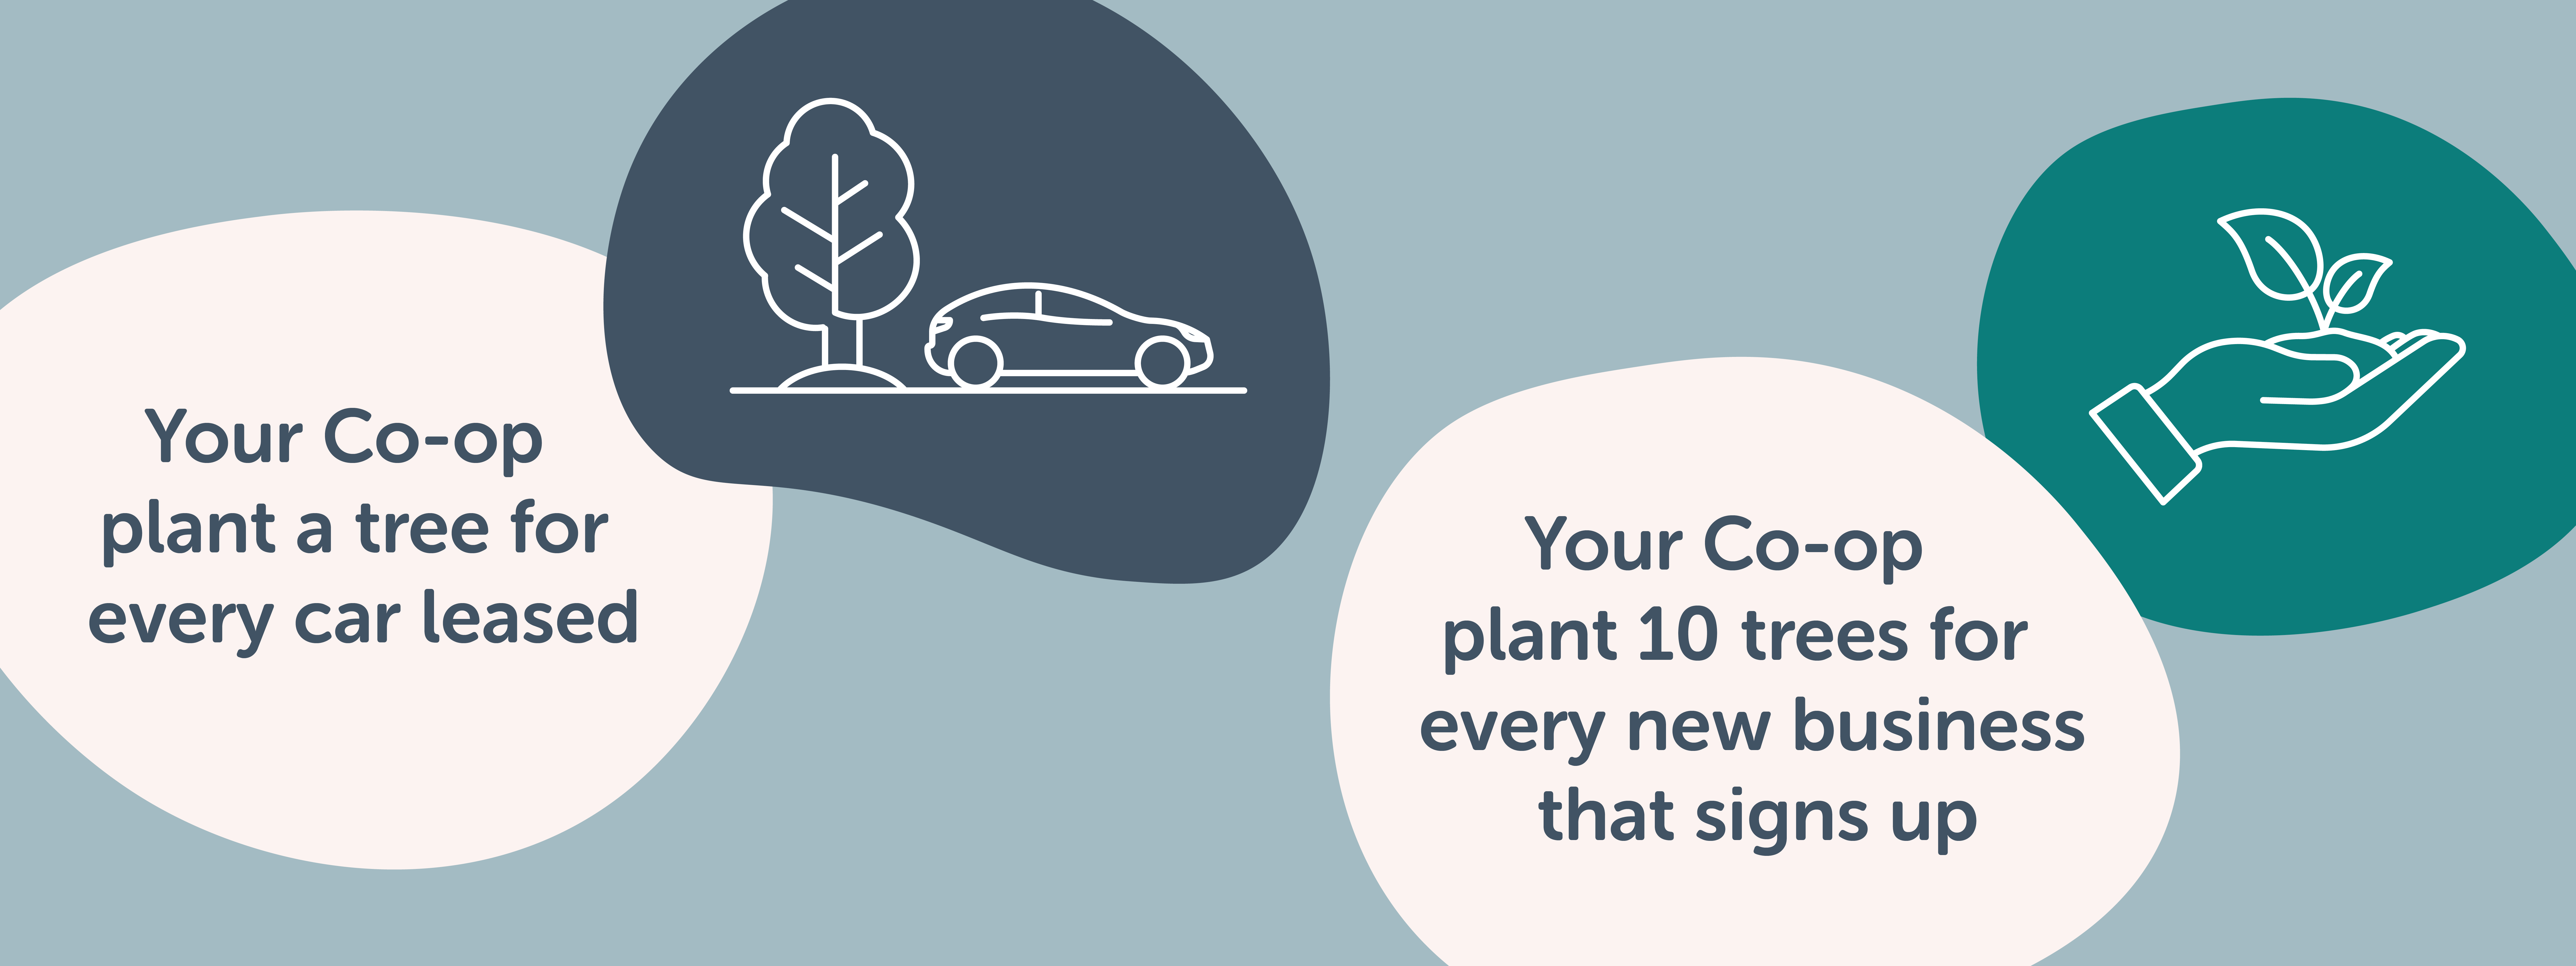 Your Co-op plant a tree for every car leased 